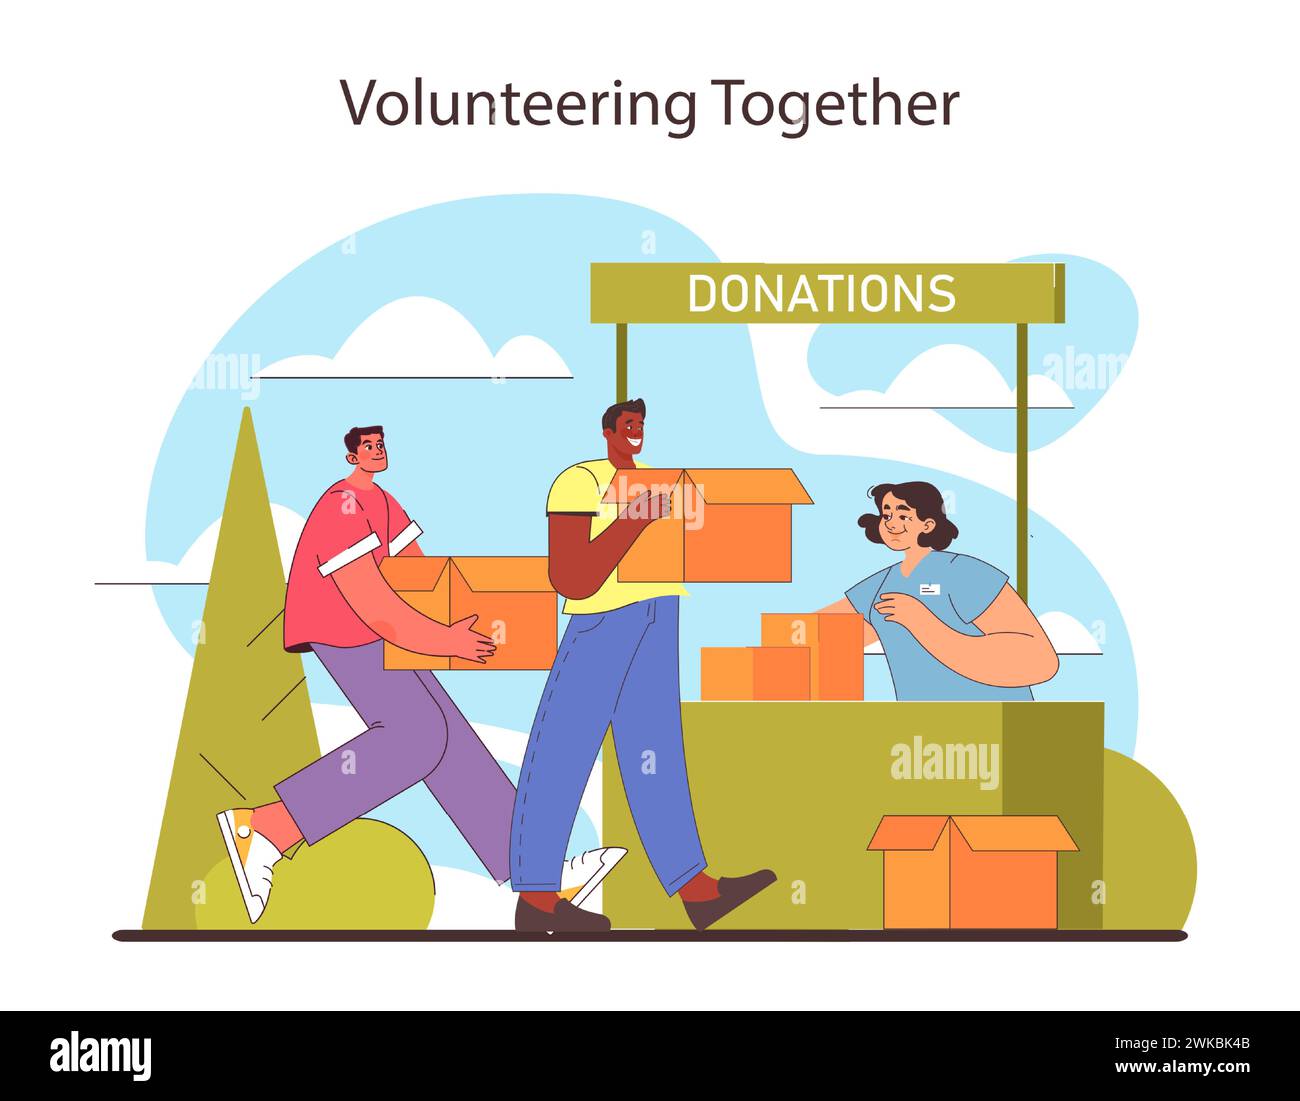 Volunteering Together concept. Companions contributing to the community by donating goods. Act of giving and social responsibility in action. Selfless service and teamwork. Flat vector illustration. Stock Vector